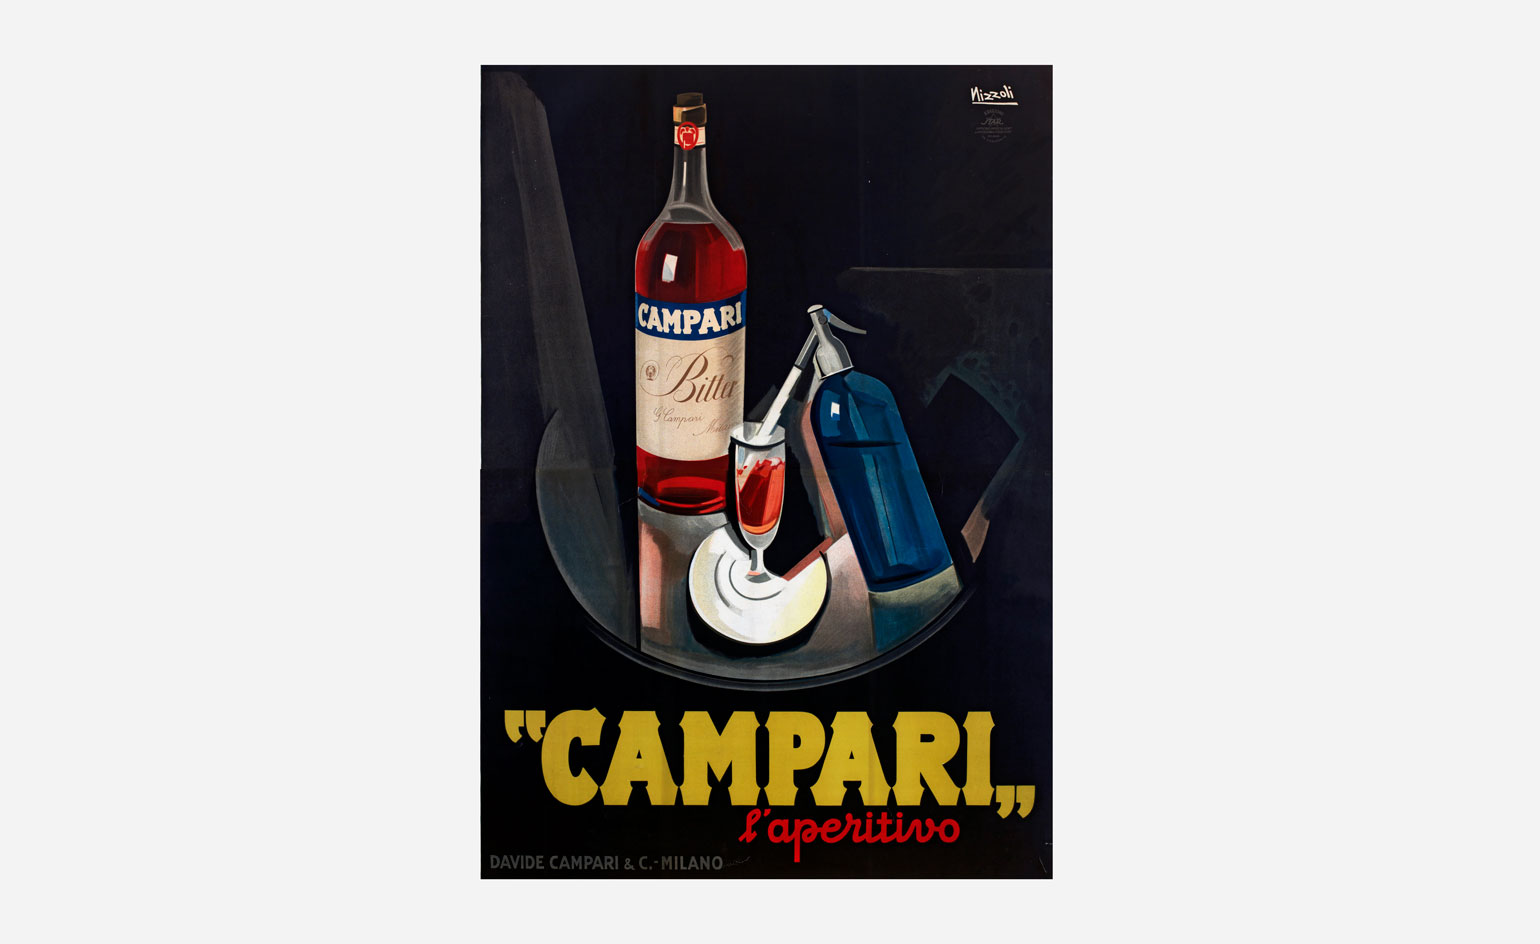 The Art of Campari posters exhibition launches in London